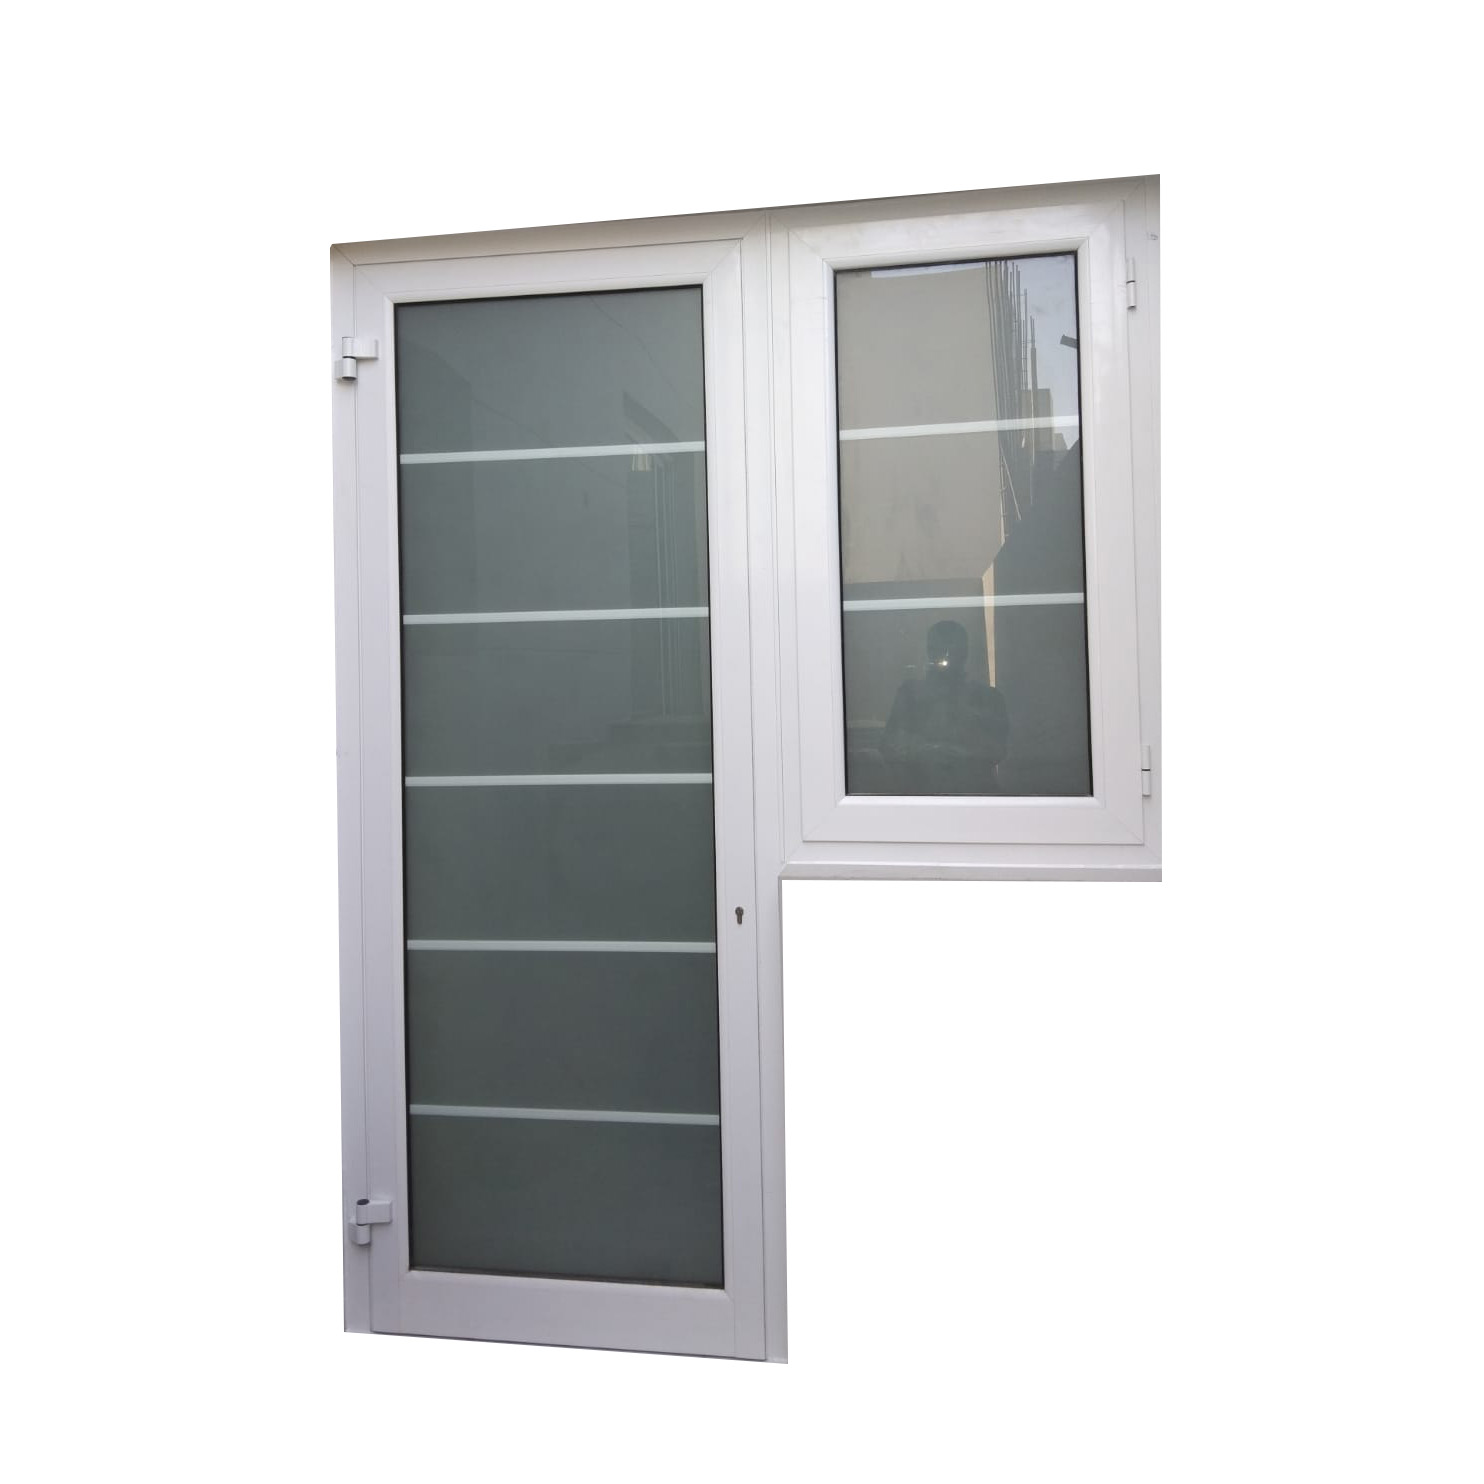 Buy White Door With Strips Online | Manufacturing Production Services | Qetaat.com